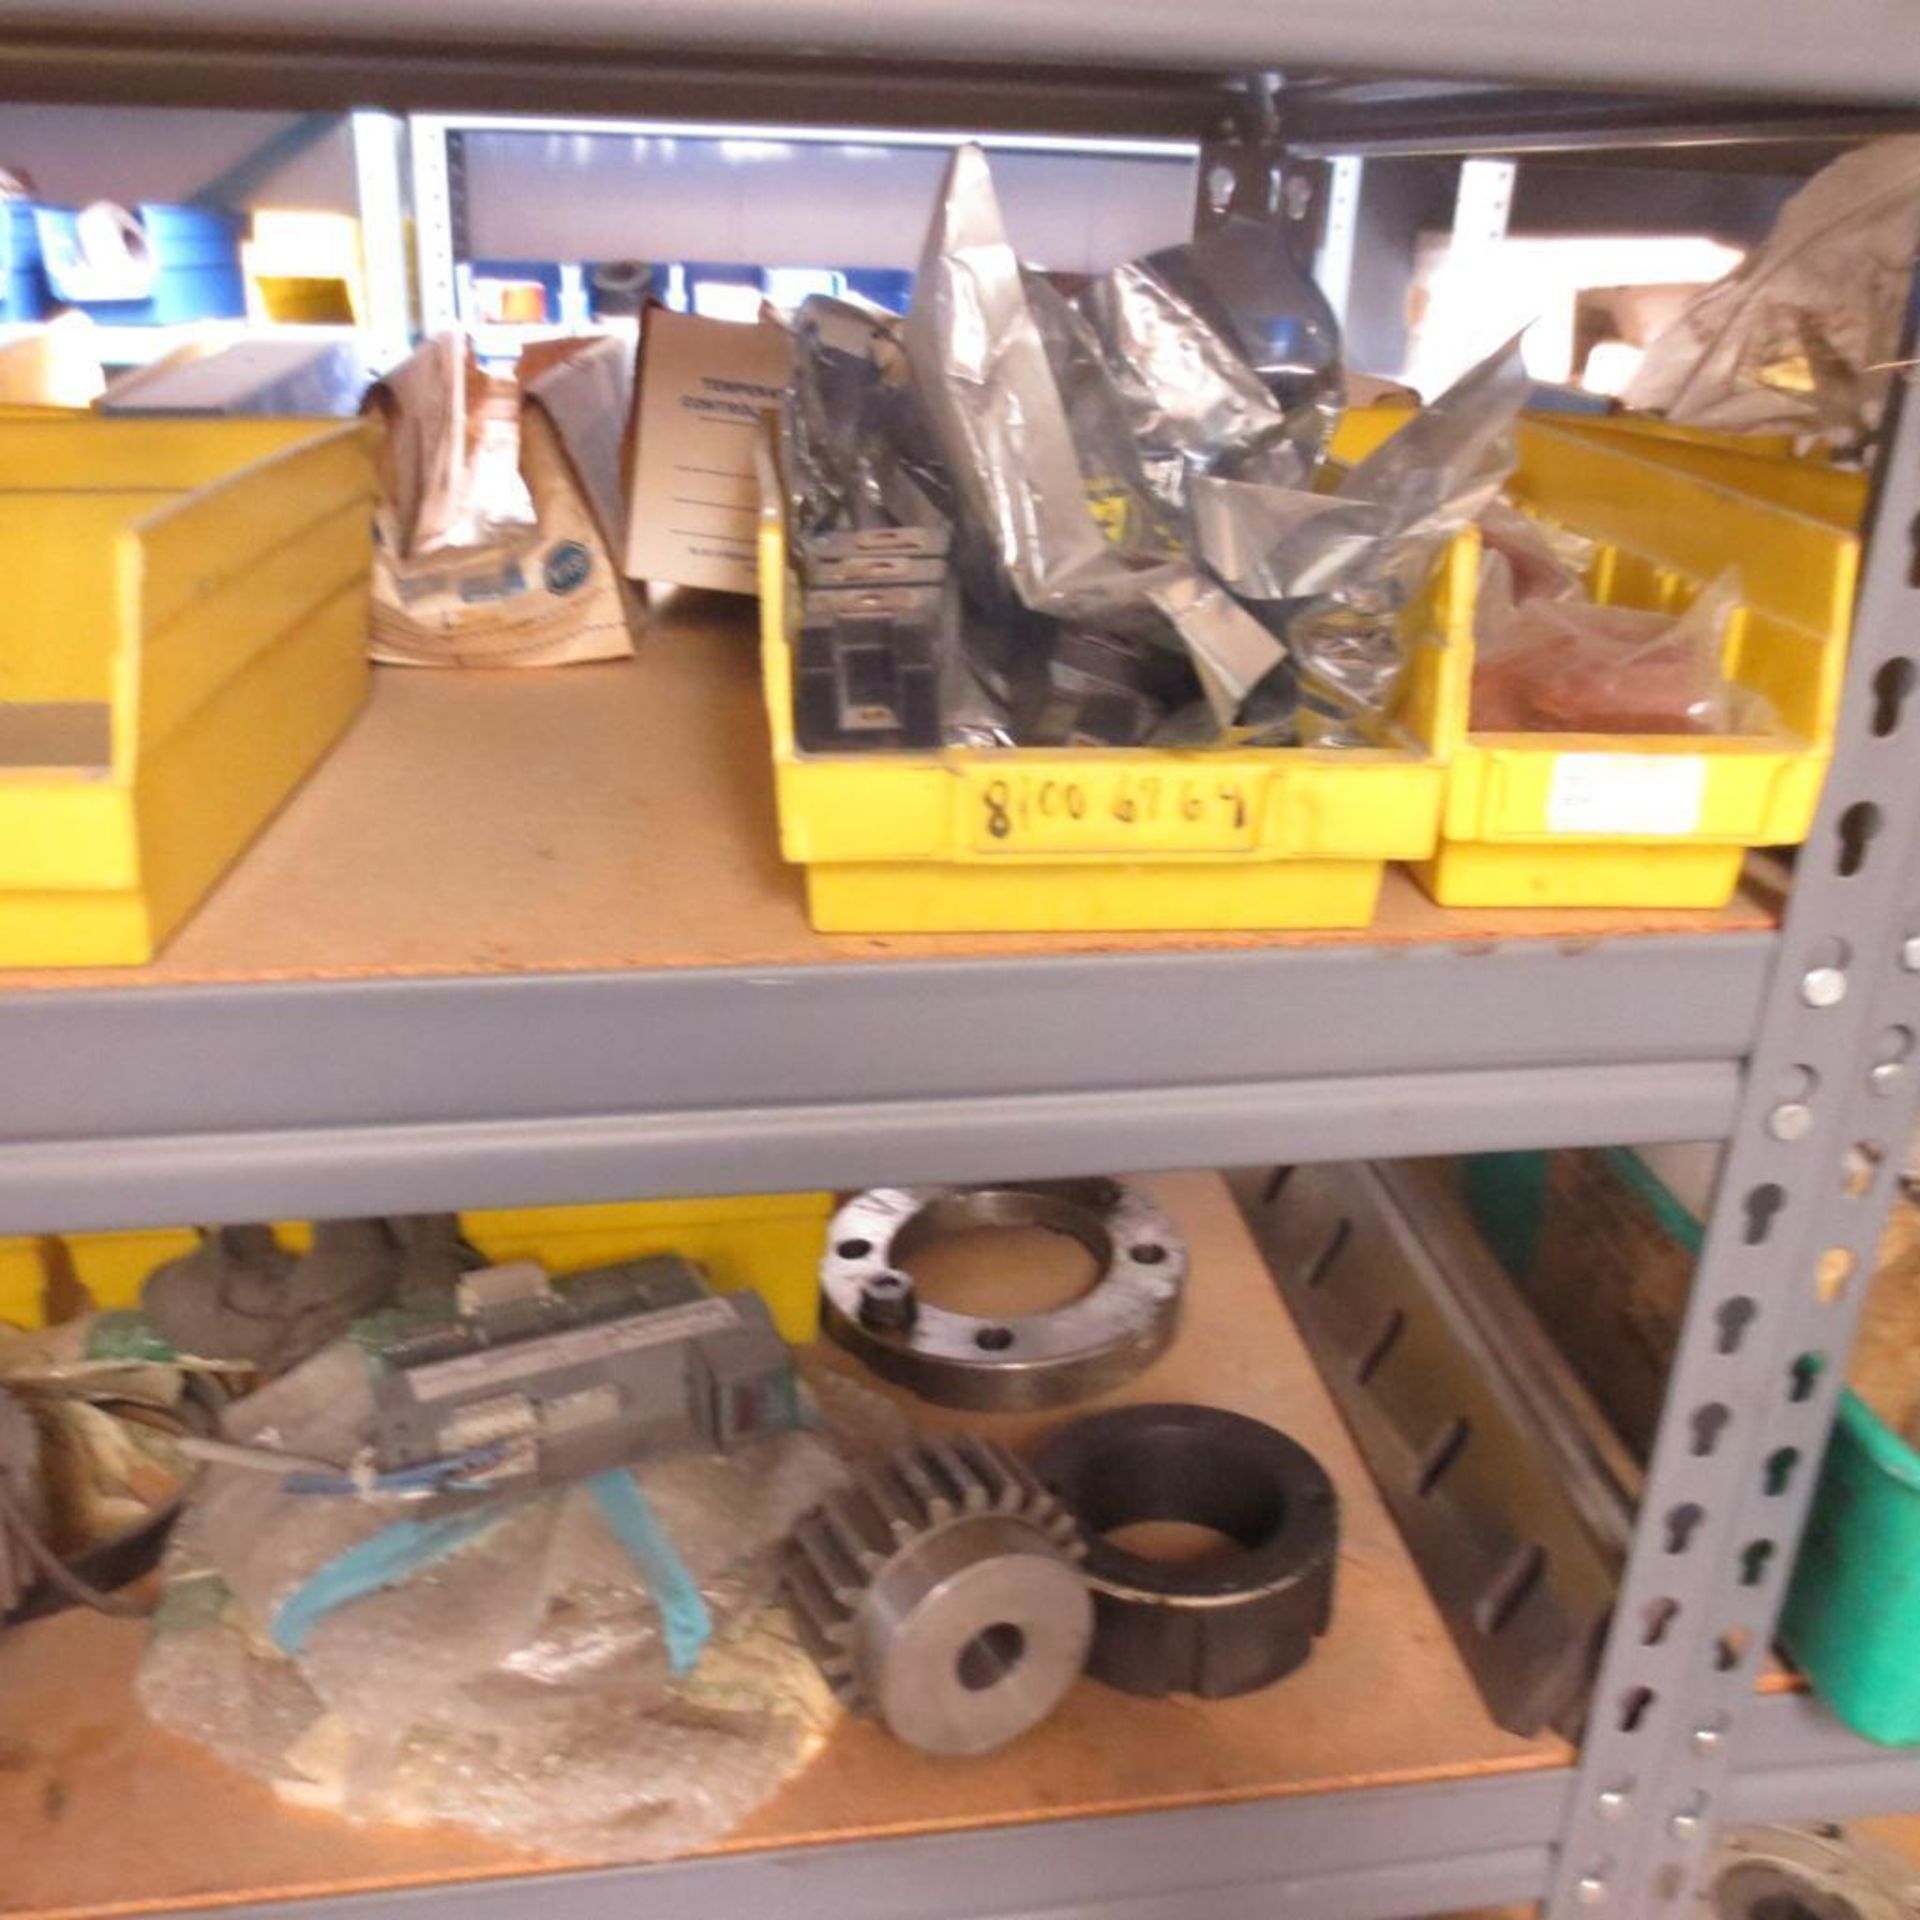 Parts Room Consisting of Gears, Electric Boards, Motors, AB Item, Filters, Motor Starters and Parts - Image 20 of 42